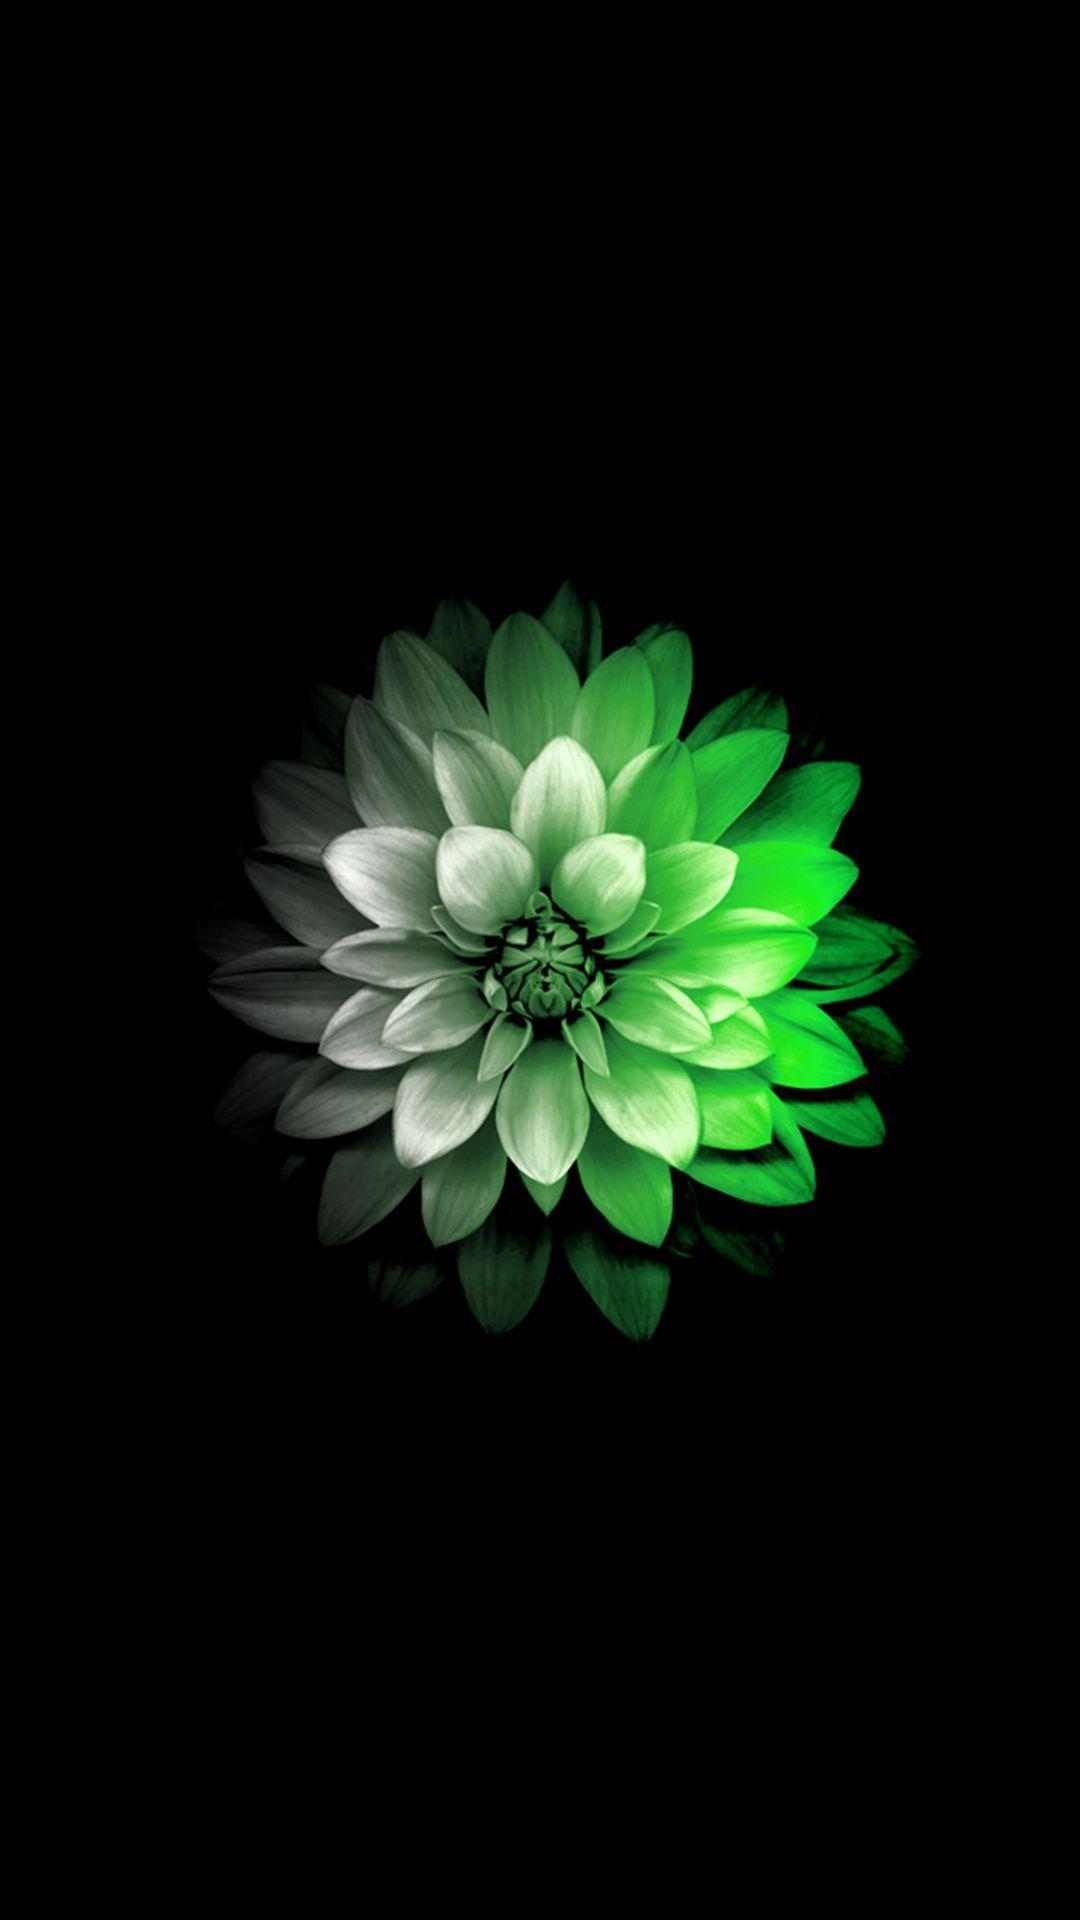 Green Flower iPhone Wallpapers - Top Free Green Flower iPhone ...